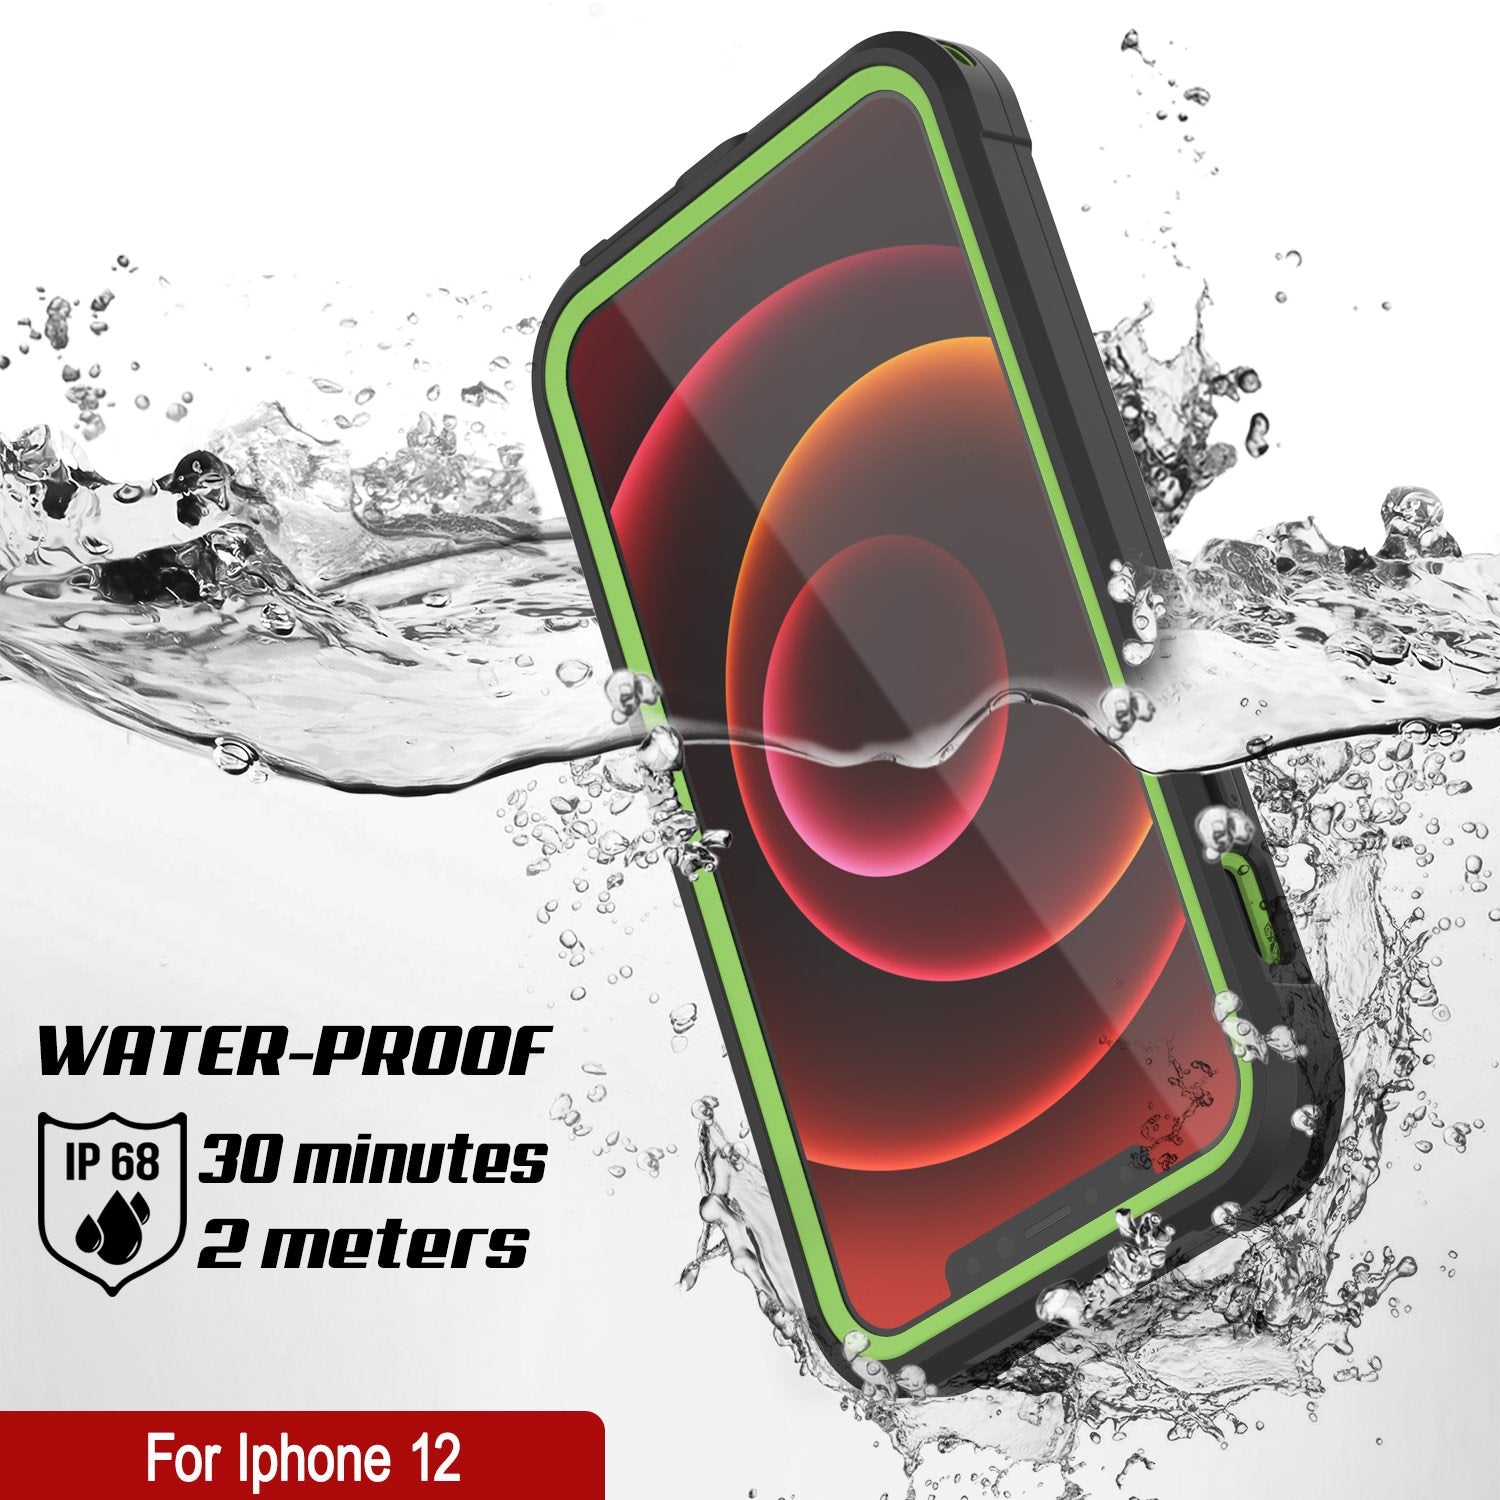 iPhone 12 Waterproof IP68 Case, Punkcase [Green]  [Maximus Series] [Slim Fit] [IP68 Certified] [Shockresistant] Clear Armor Cover with Screen Protector | Ultimate Protection